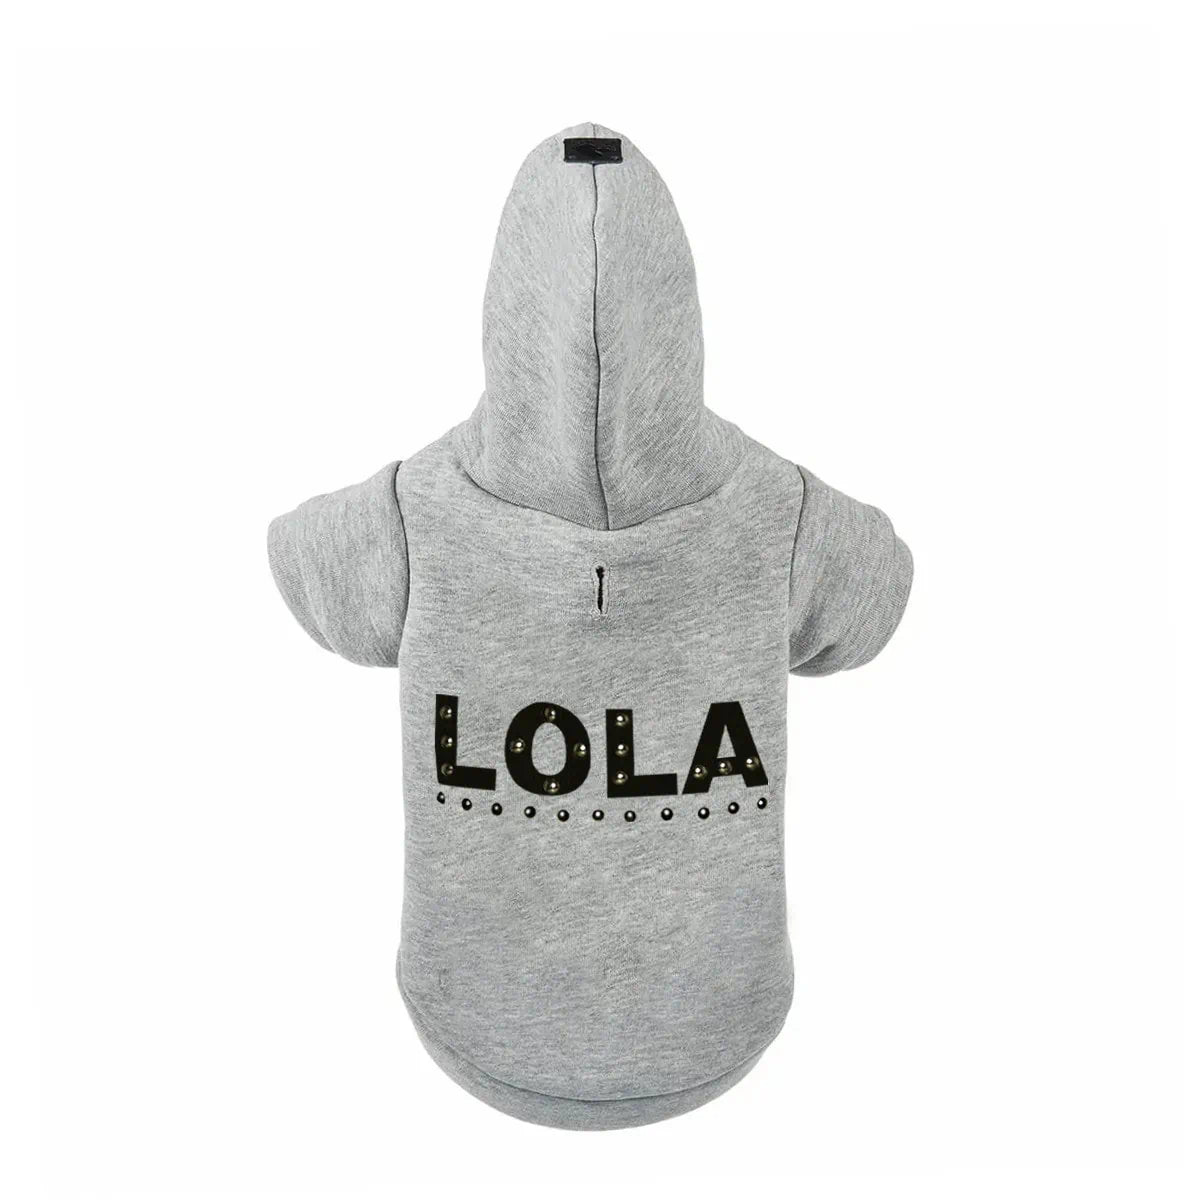 Hoodie for Bulldog with studs - Customizable with name.